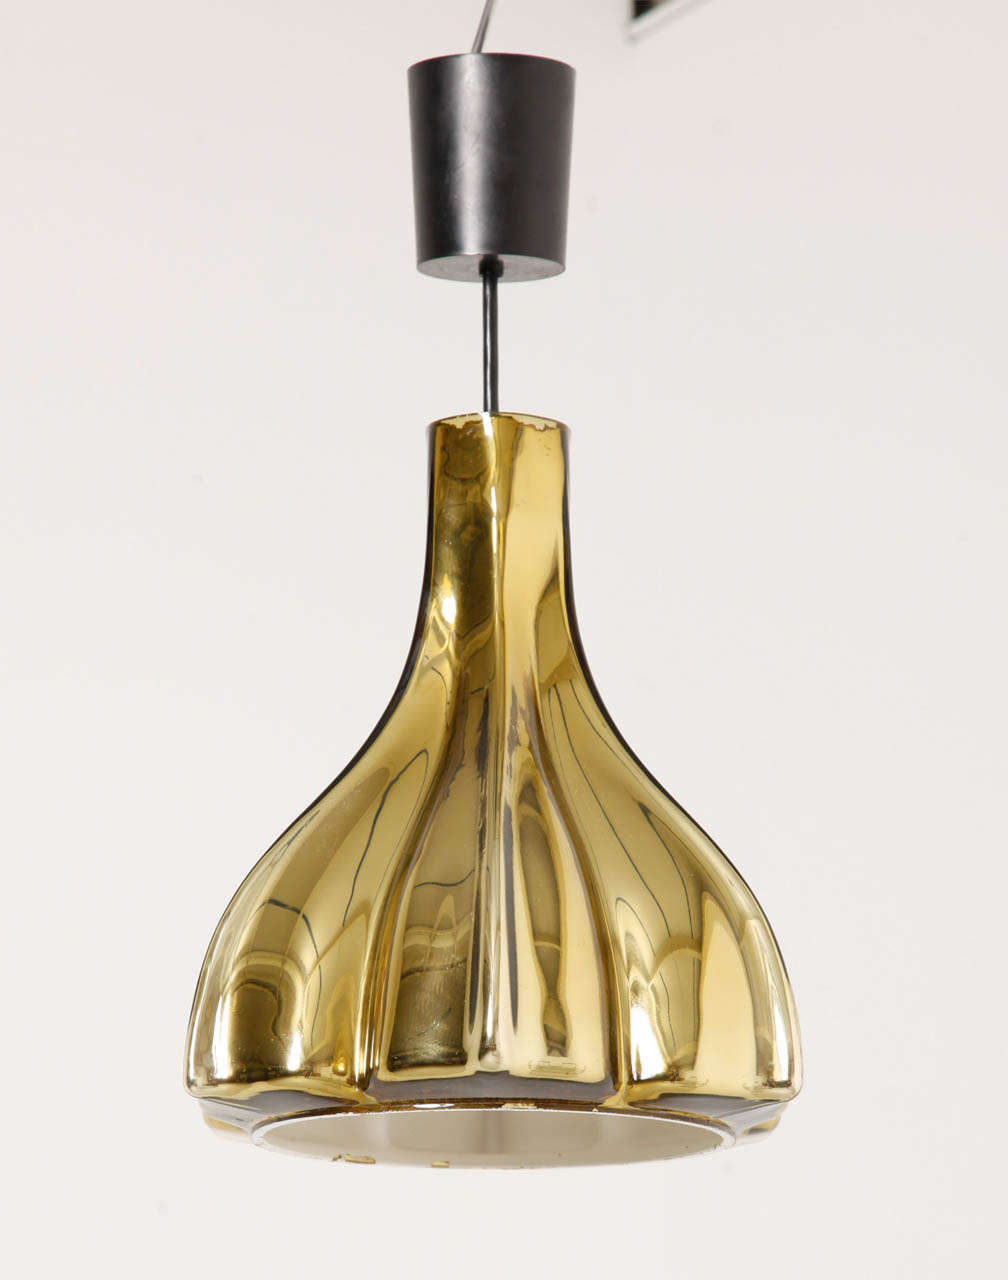 A beautiful floral shaped pendant with two layers of opaline glass. Inside a white opaline glass with a mirror golden glass exterior. Lighted up the lamp gives a very nice atmospherics' light.